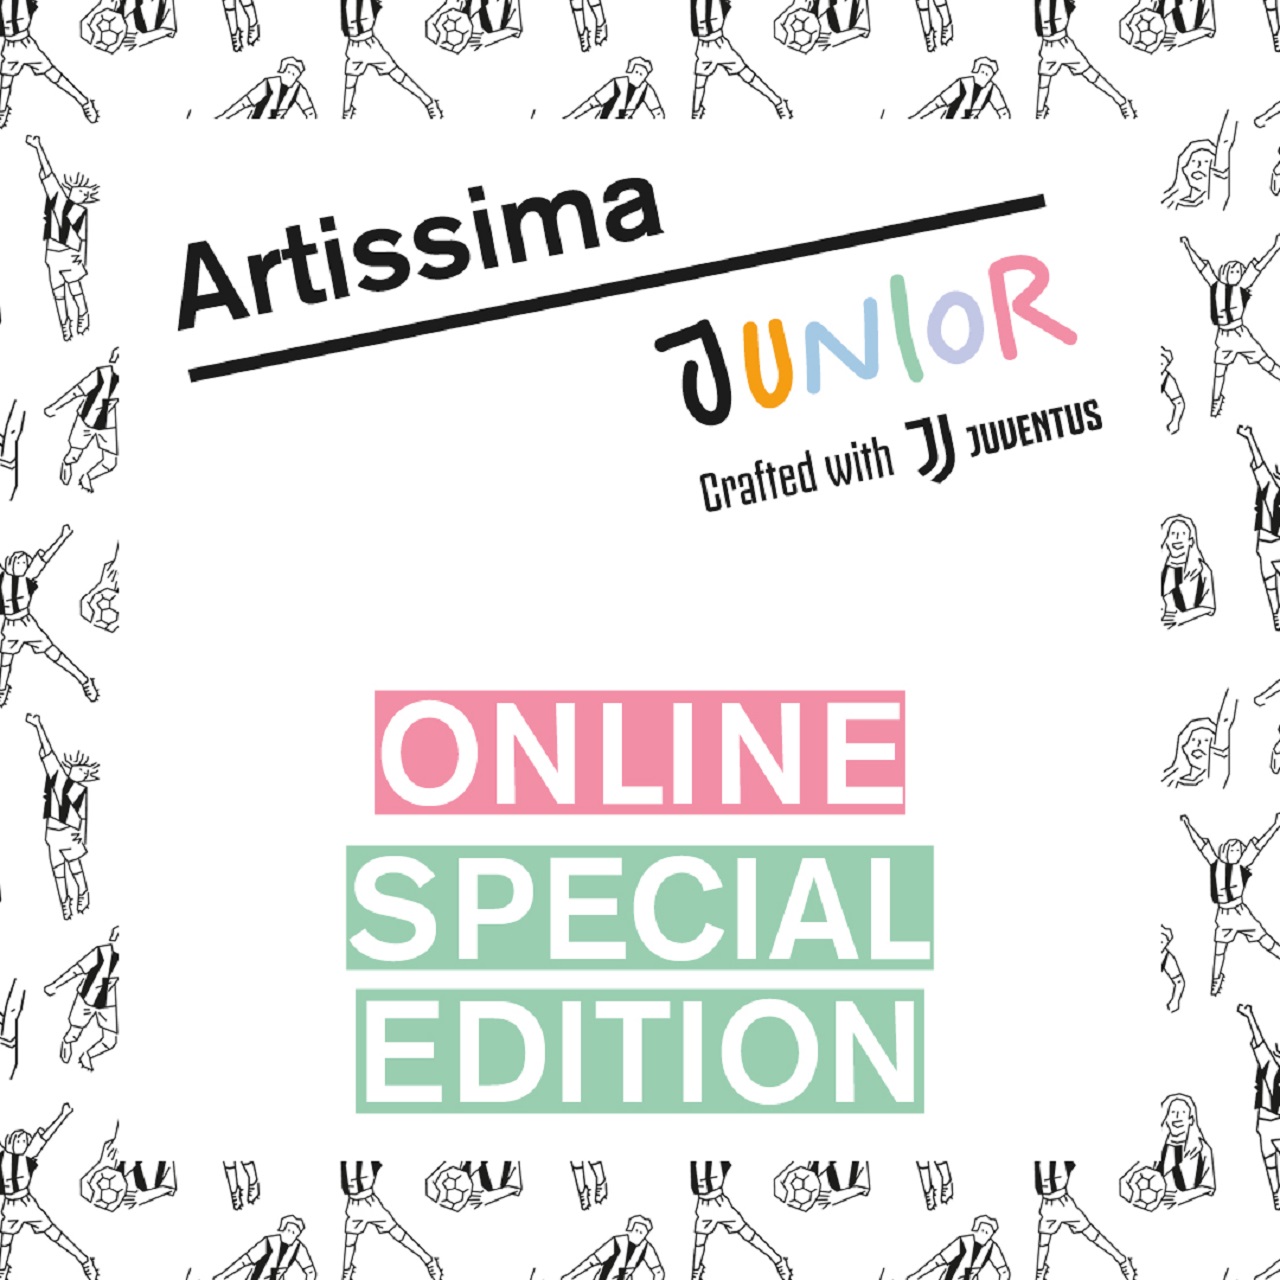 Artissima Junior, crafted with Juventus – online special edition